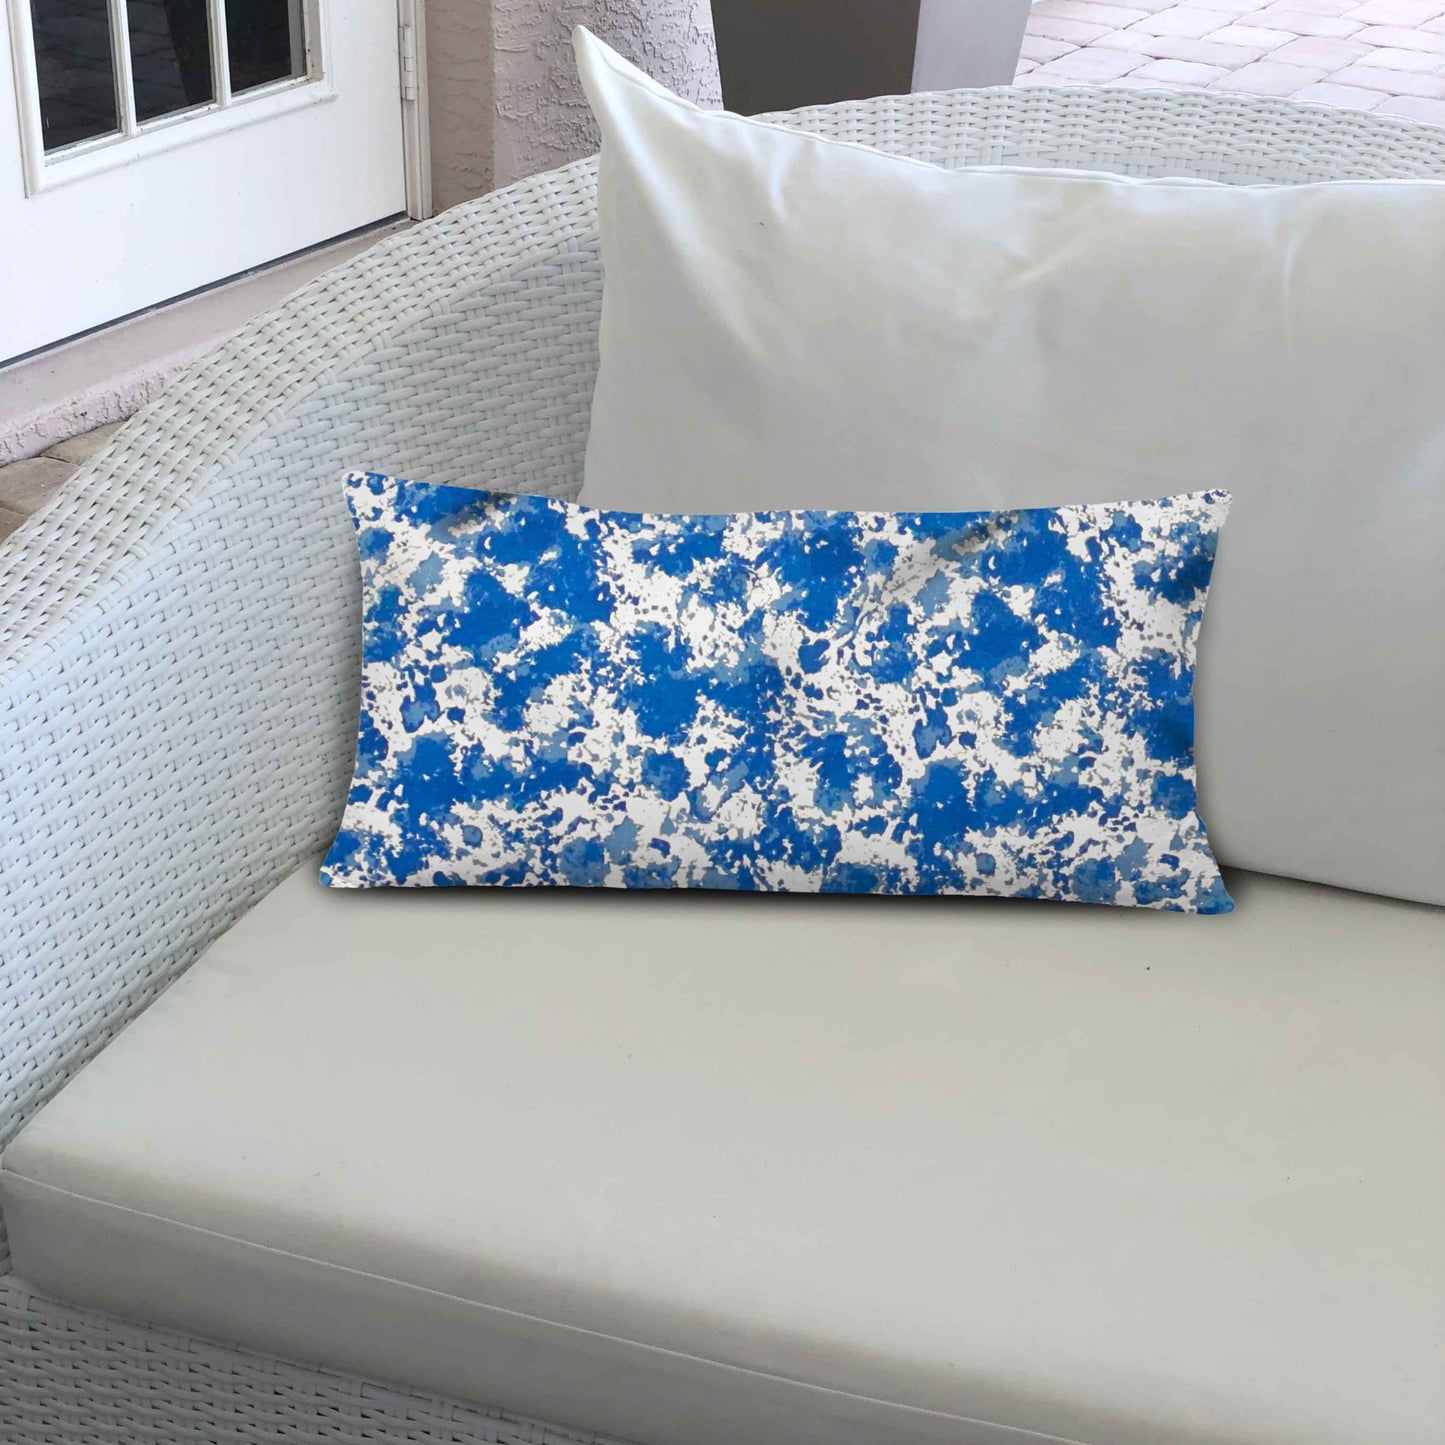 16" X 26" Blue And White Zippered Coastal Lumbar Indoor Outdoor Pillow Cover